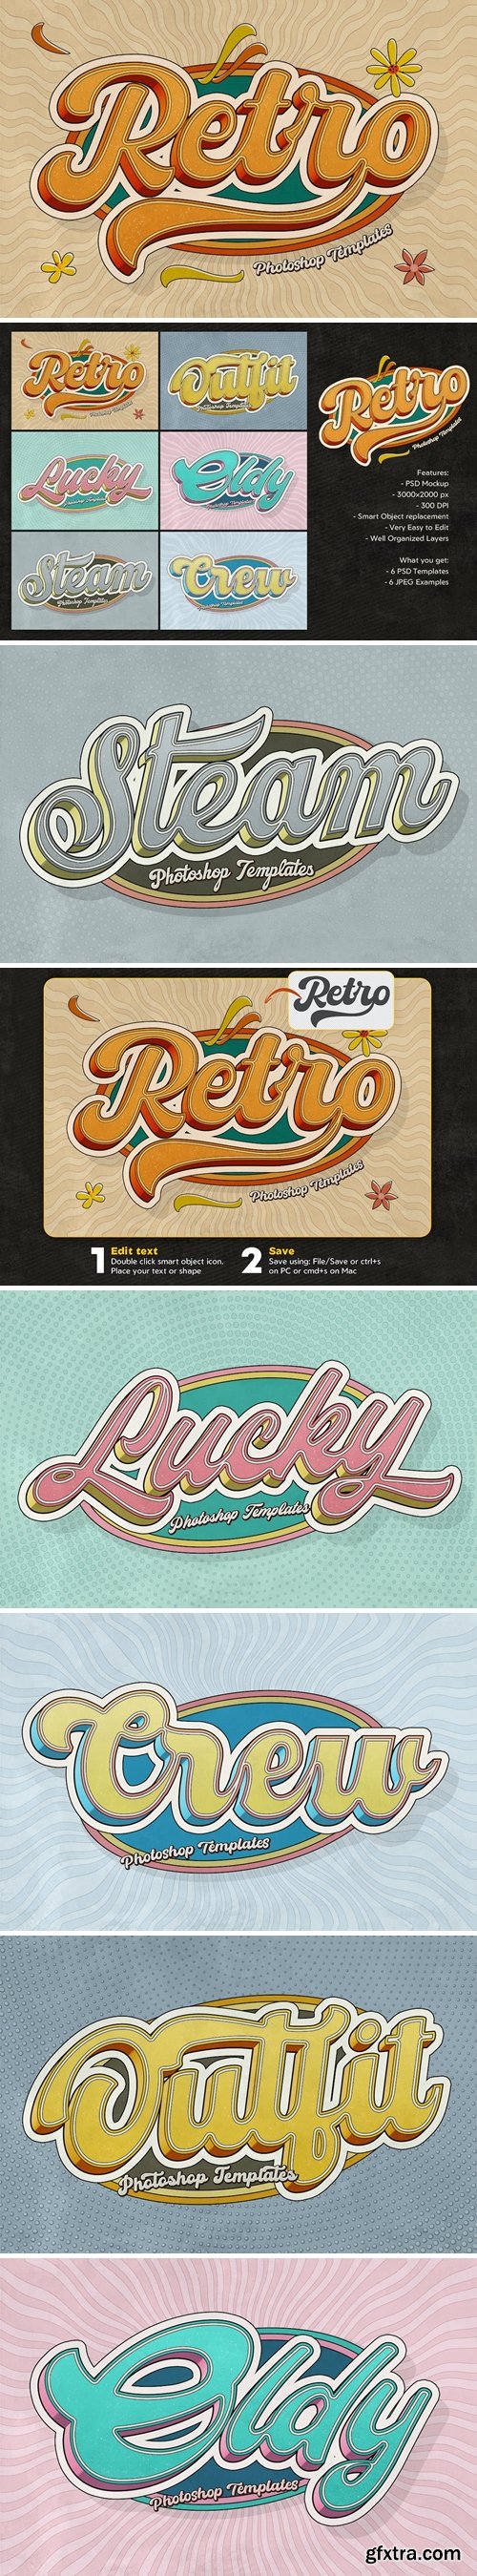 Retro Text Effects WFACGQY